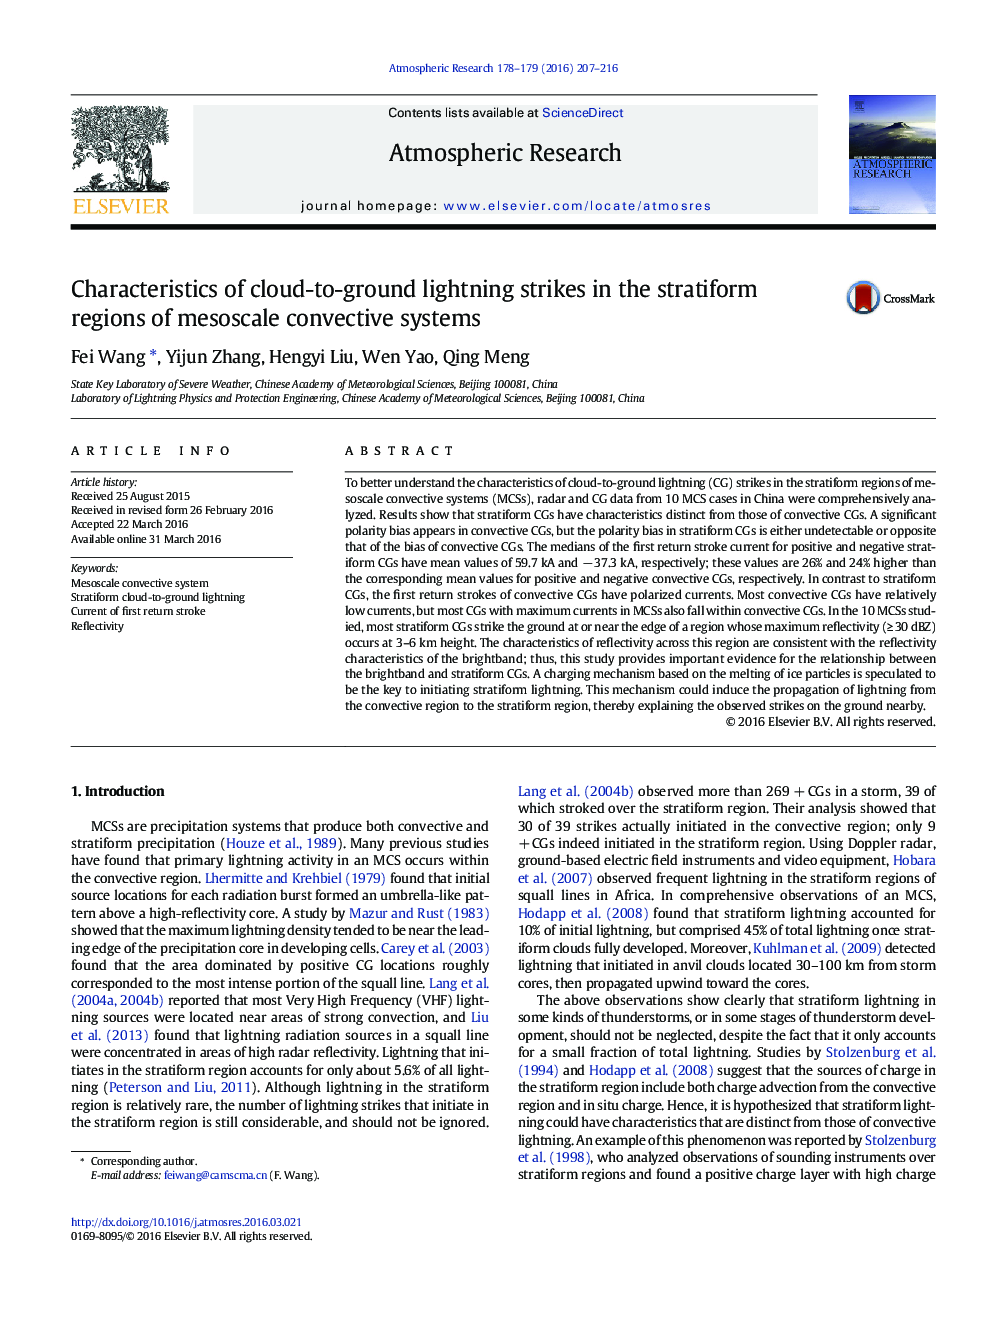 Characteristics of cloud-to-ground lightning strikes in the stratiform regions of mesoscale convective systems